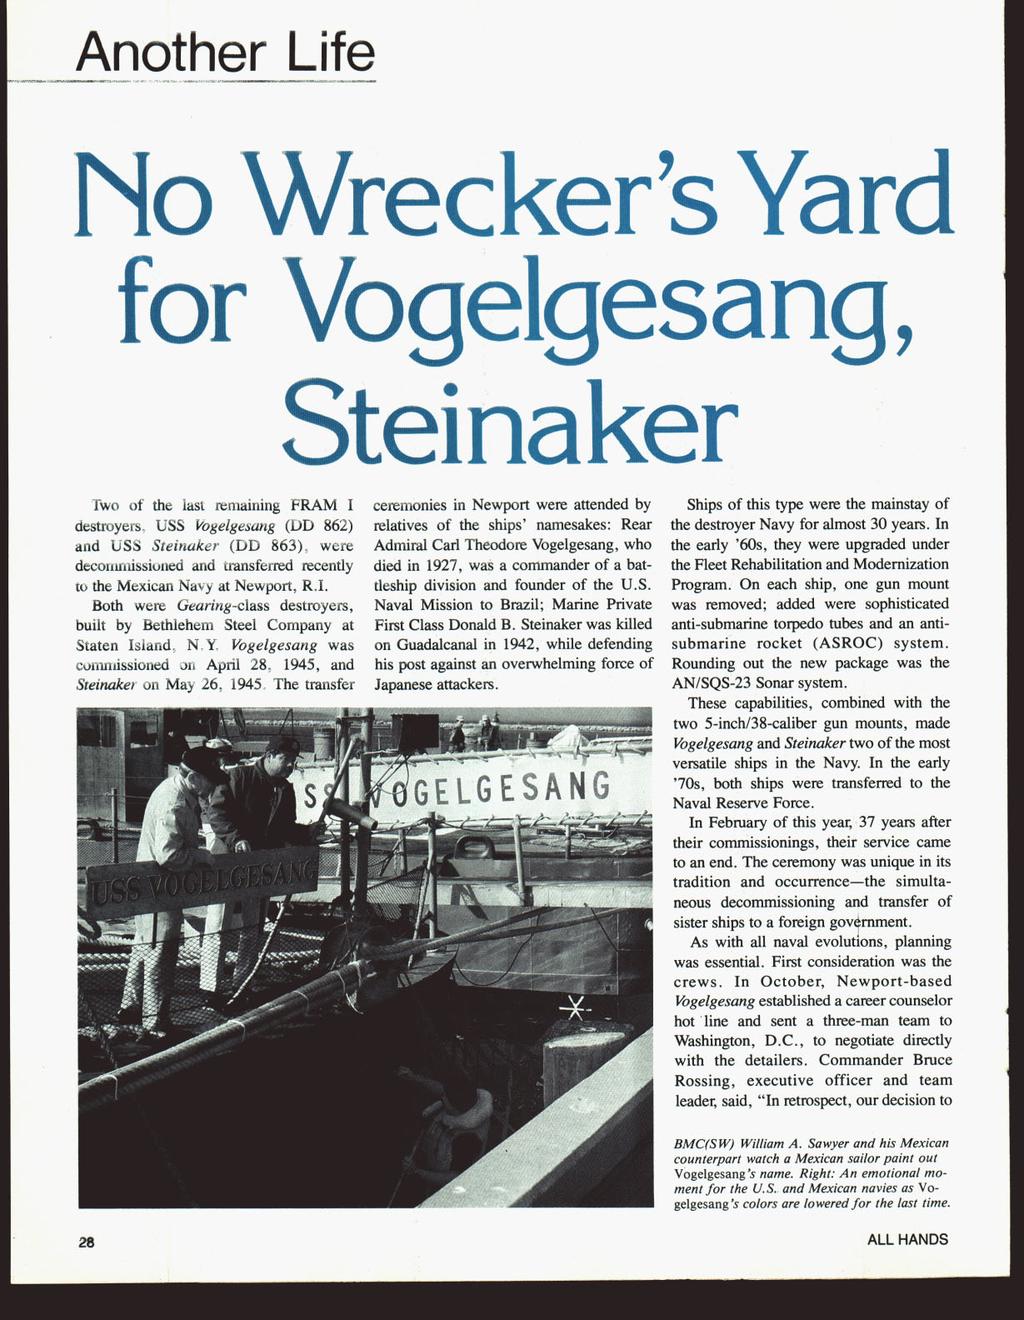 Another Life No Wrecker s Yard for Vogelgesang, Steinaker ceremonies in Newport were attended by relatives of the ships namesakes: Rear Admiral Carl Theodore Vogelgesang, who died in 192 7, was a